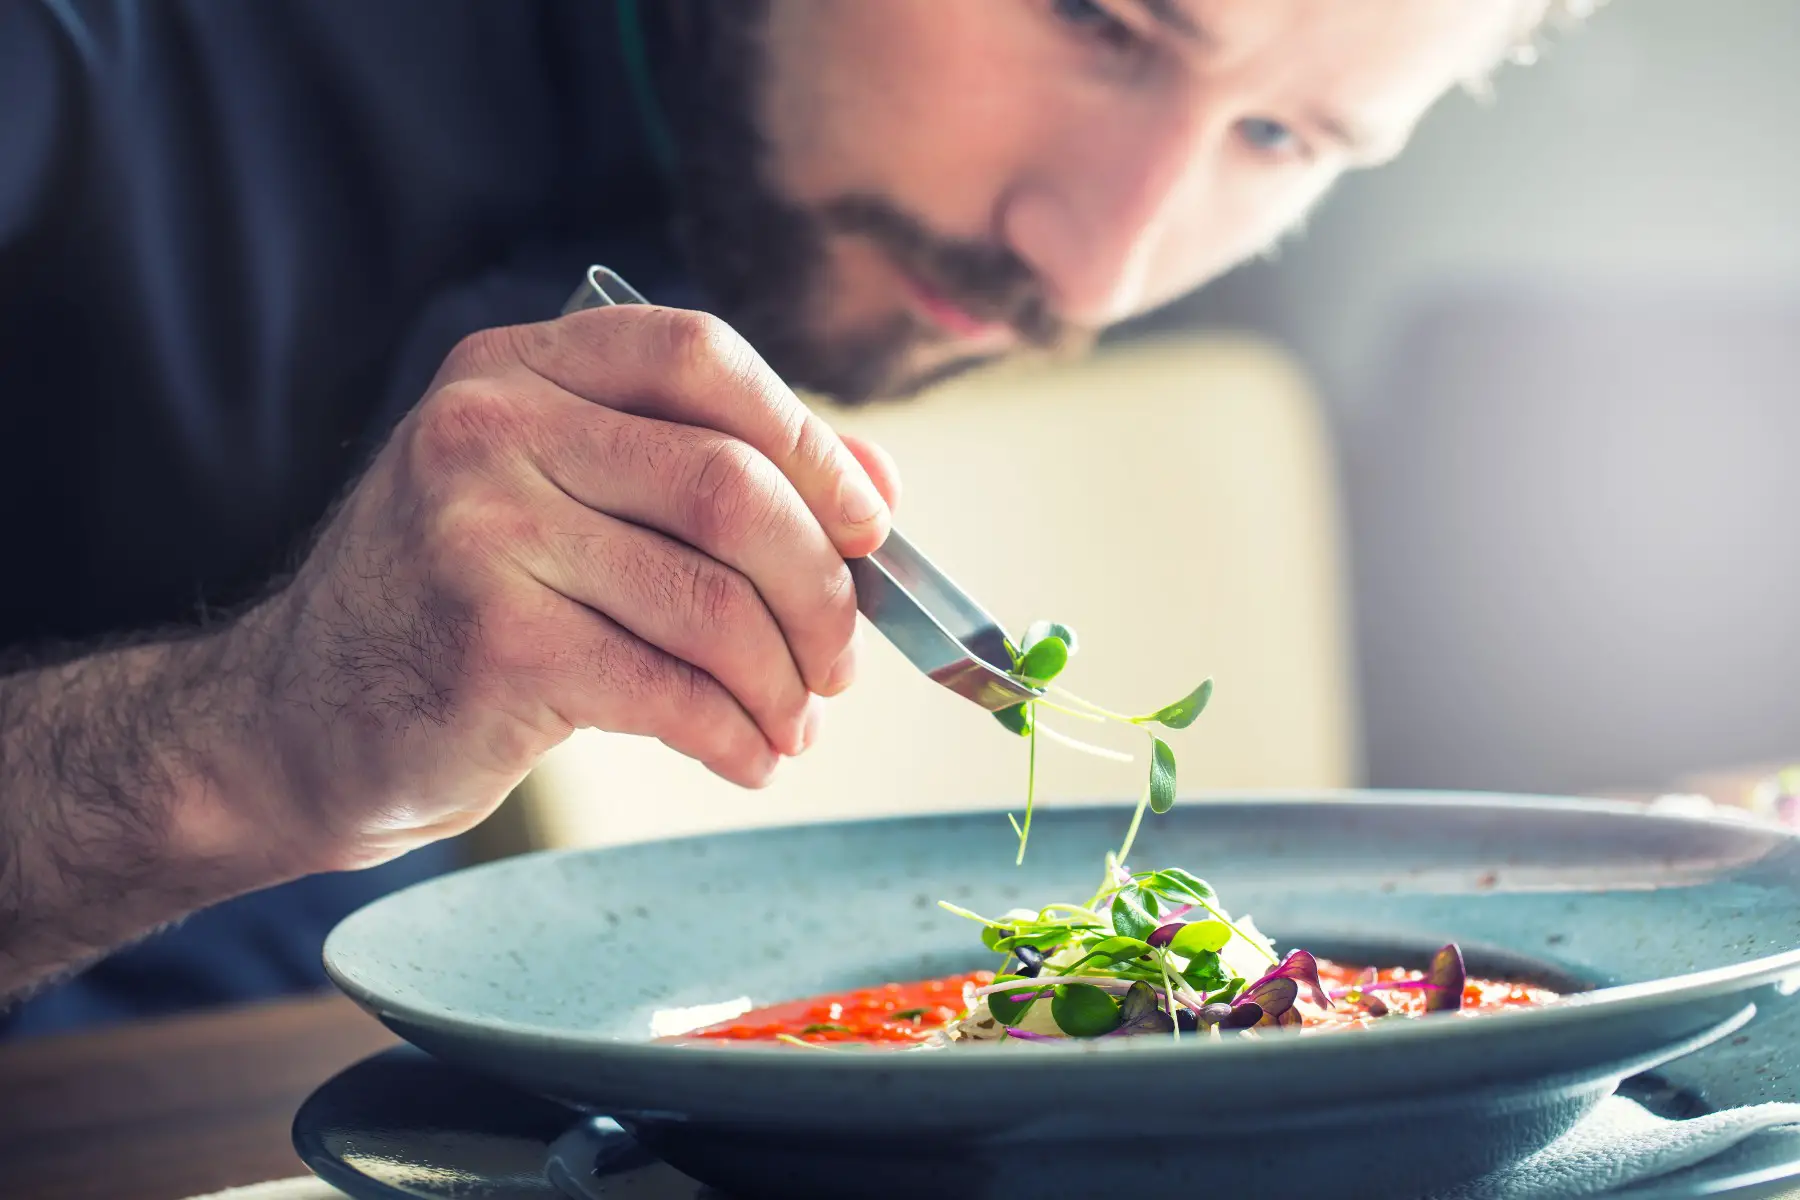 Chef in a restaurant putting herbs with some tweezers on tomato soup.